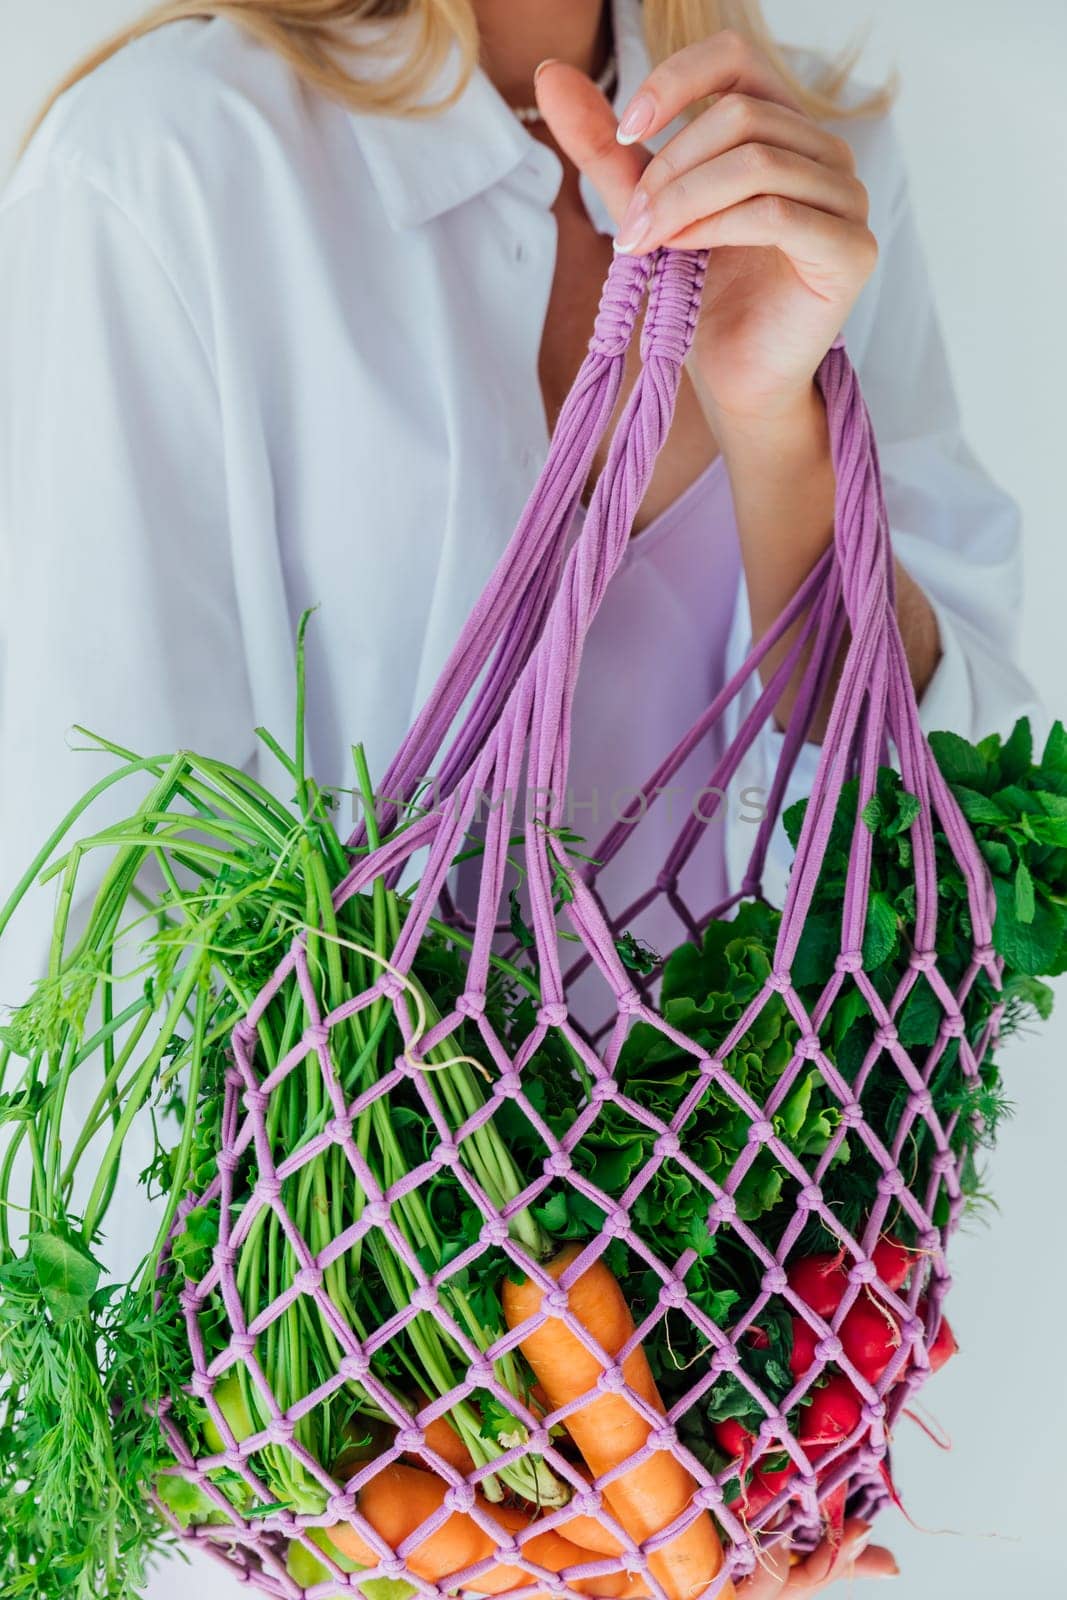 Female nutritionist holding bag with vegetables for cooking by Simakov